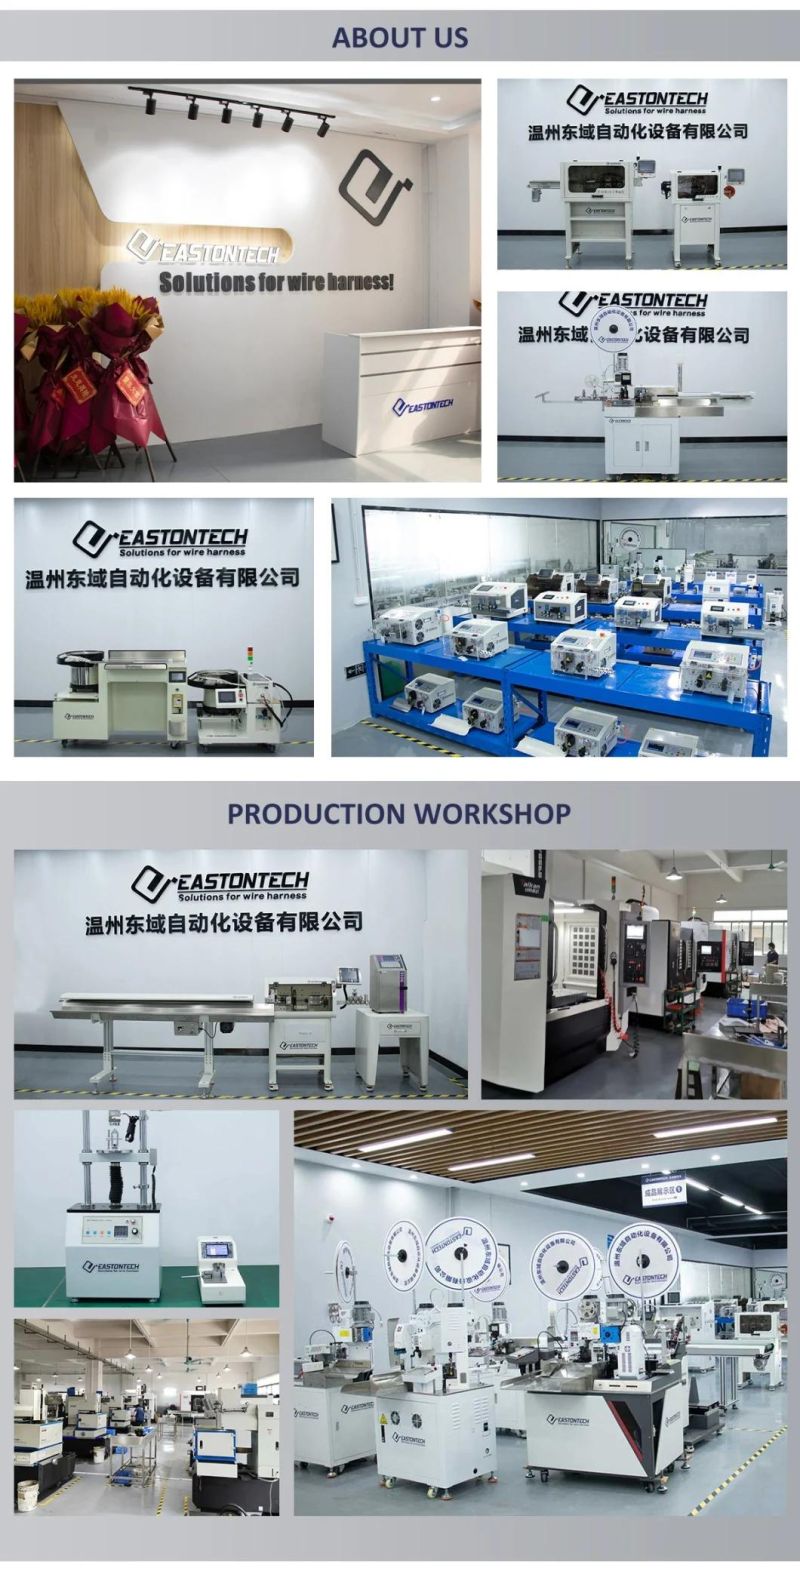 Eastontech Ew-01A Automatic Wire Cutting and Stripping Machine 0.1-2.5mm2